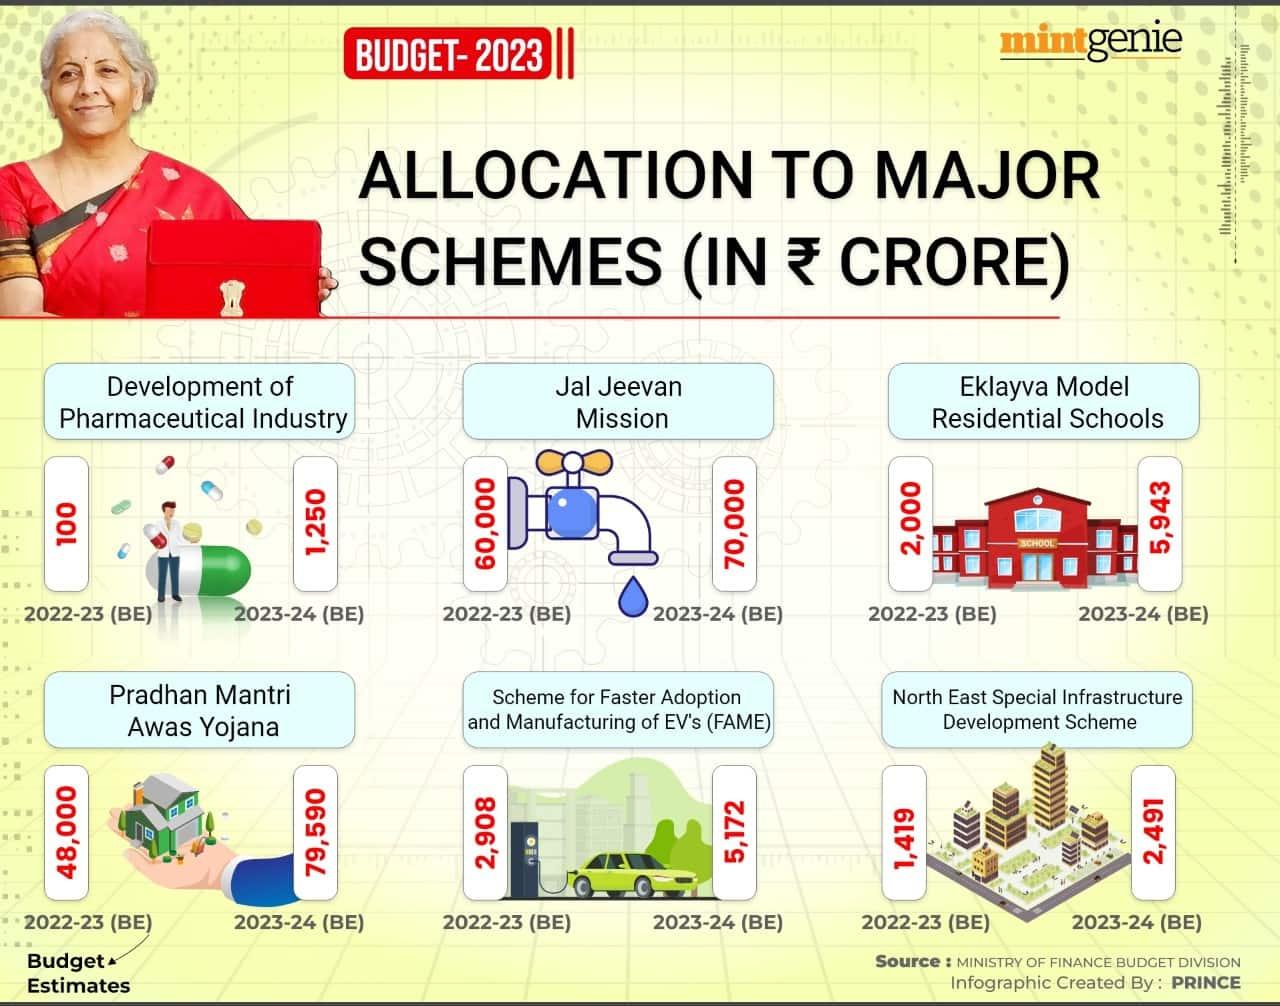 Budget 2023: Allocation to major schemes 